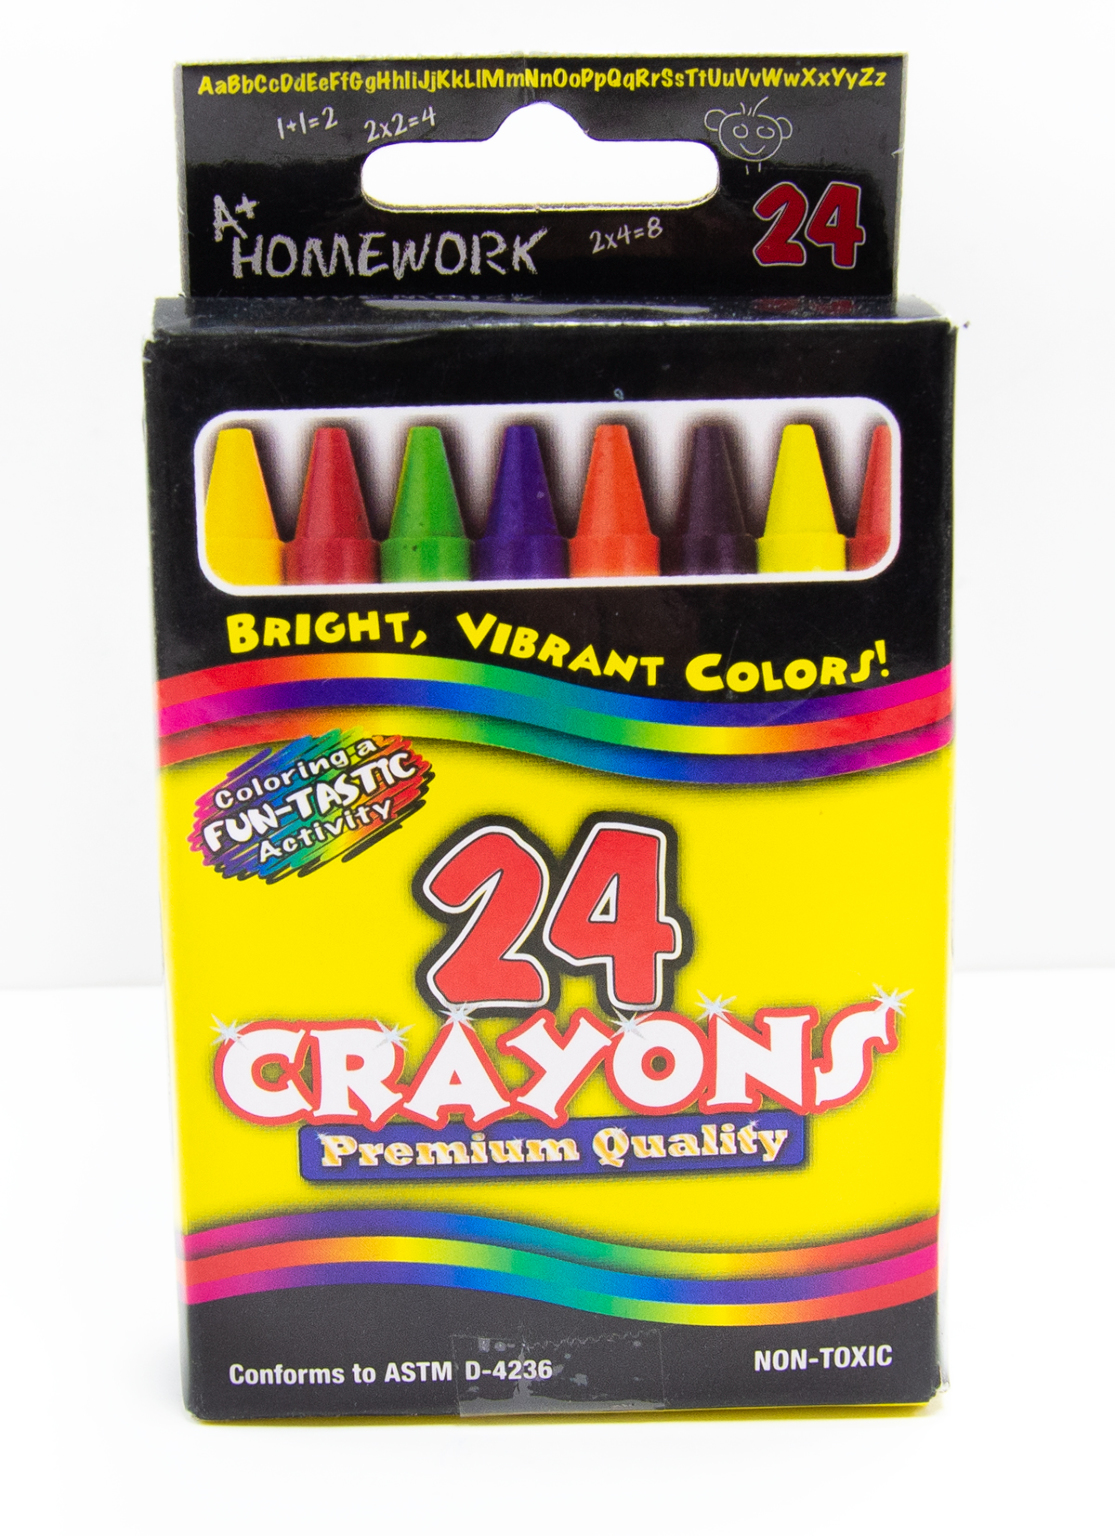 Bulk Plastic Crayons with 12 Colors in Triangle Shape - DollarDays